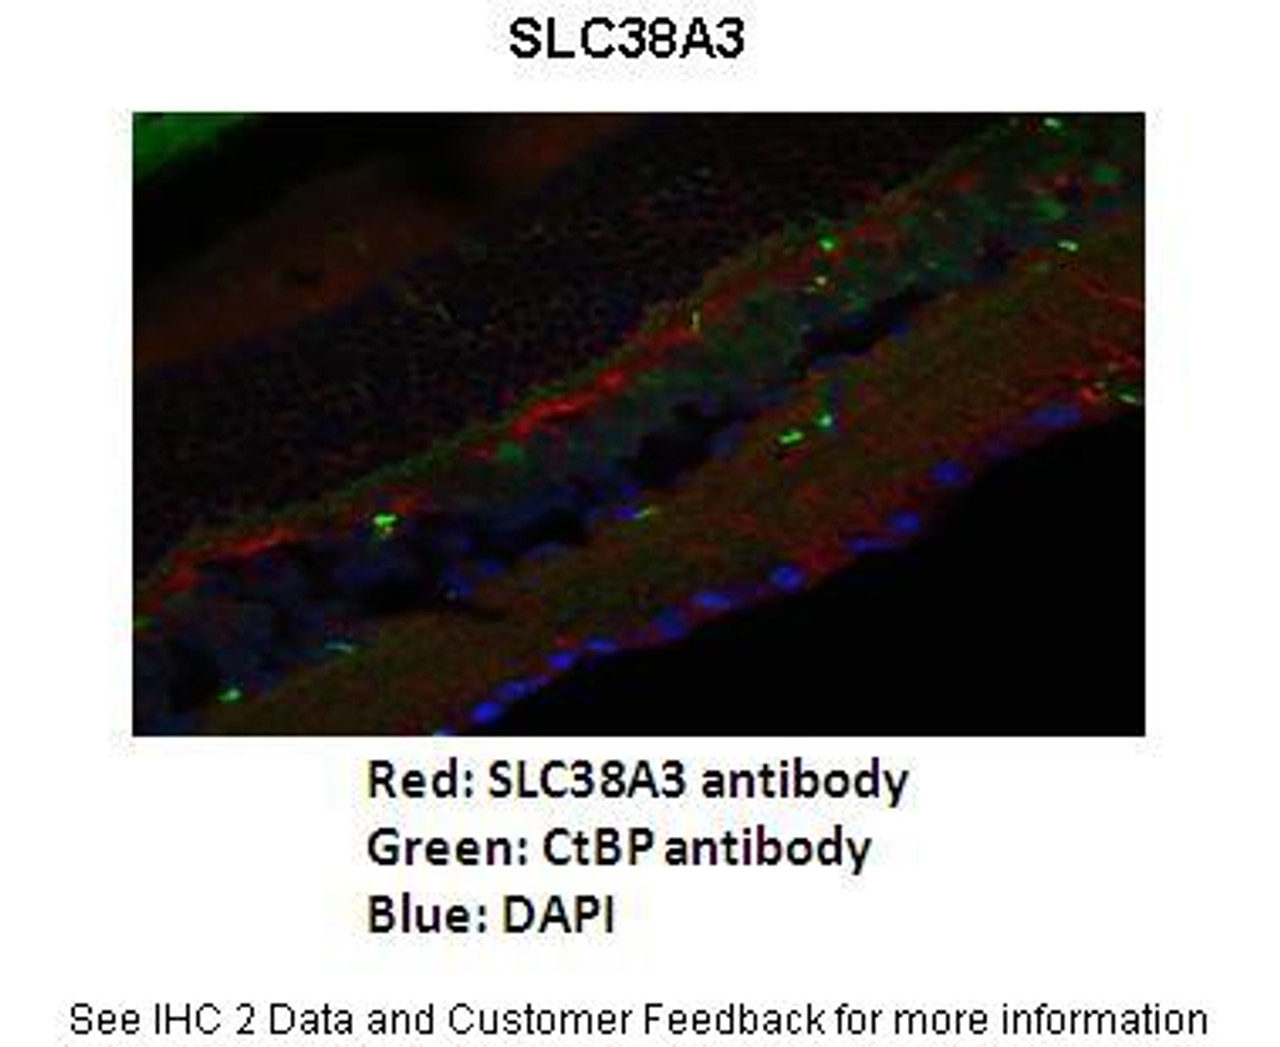 Antibody used in IHC on Mouse retina at s 1:200.